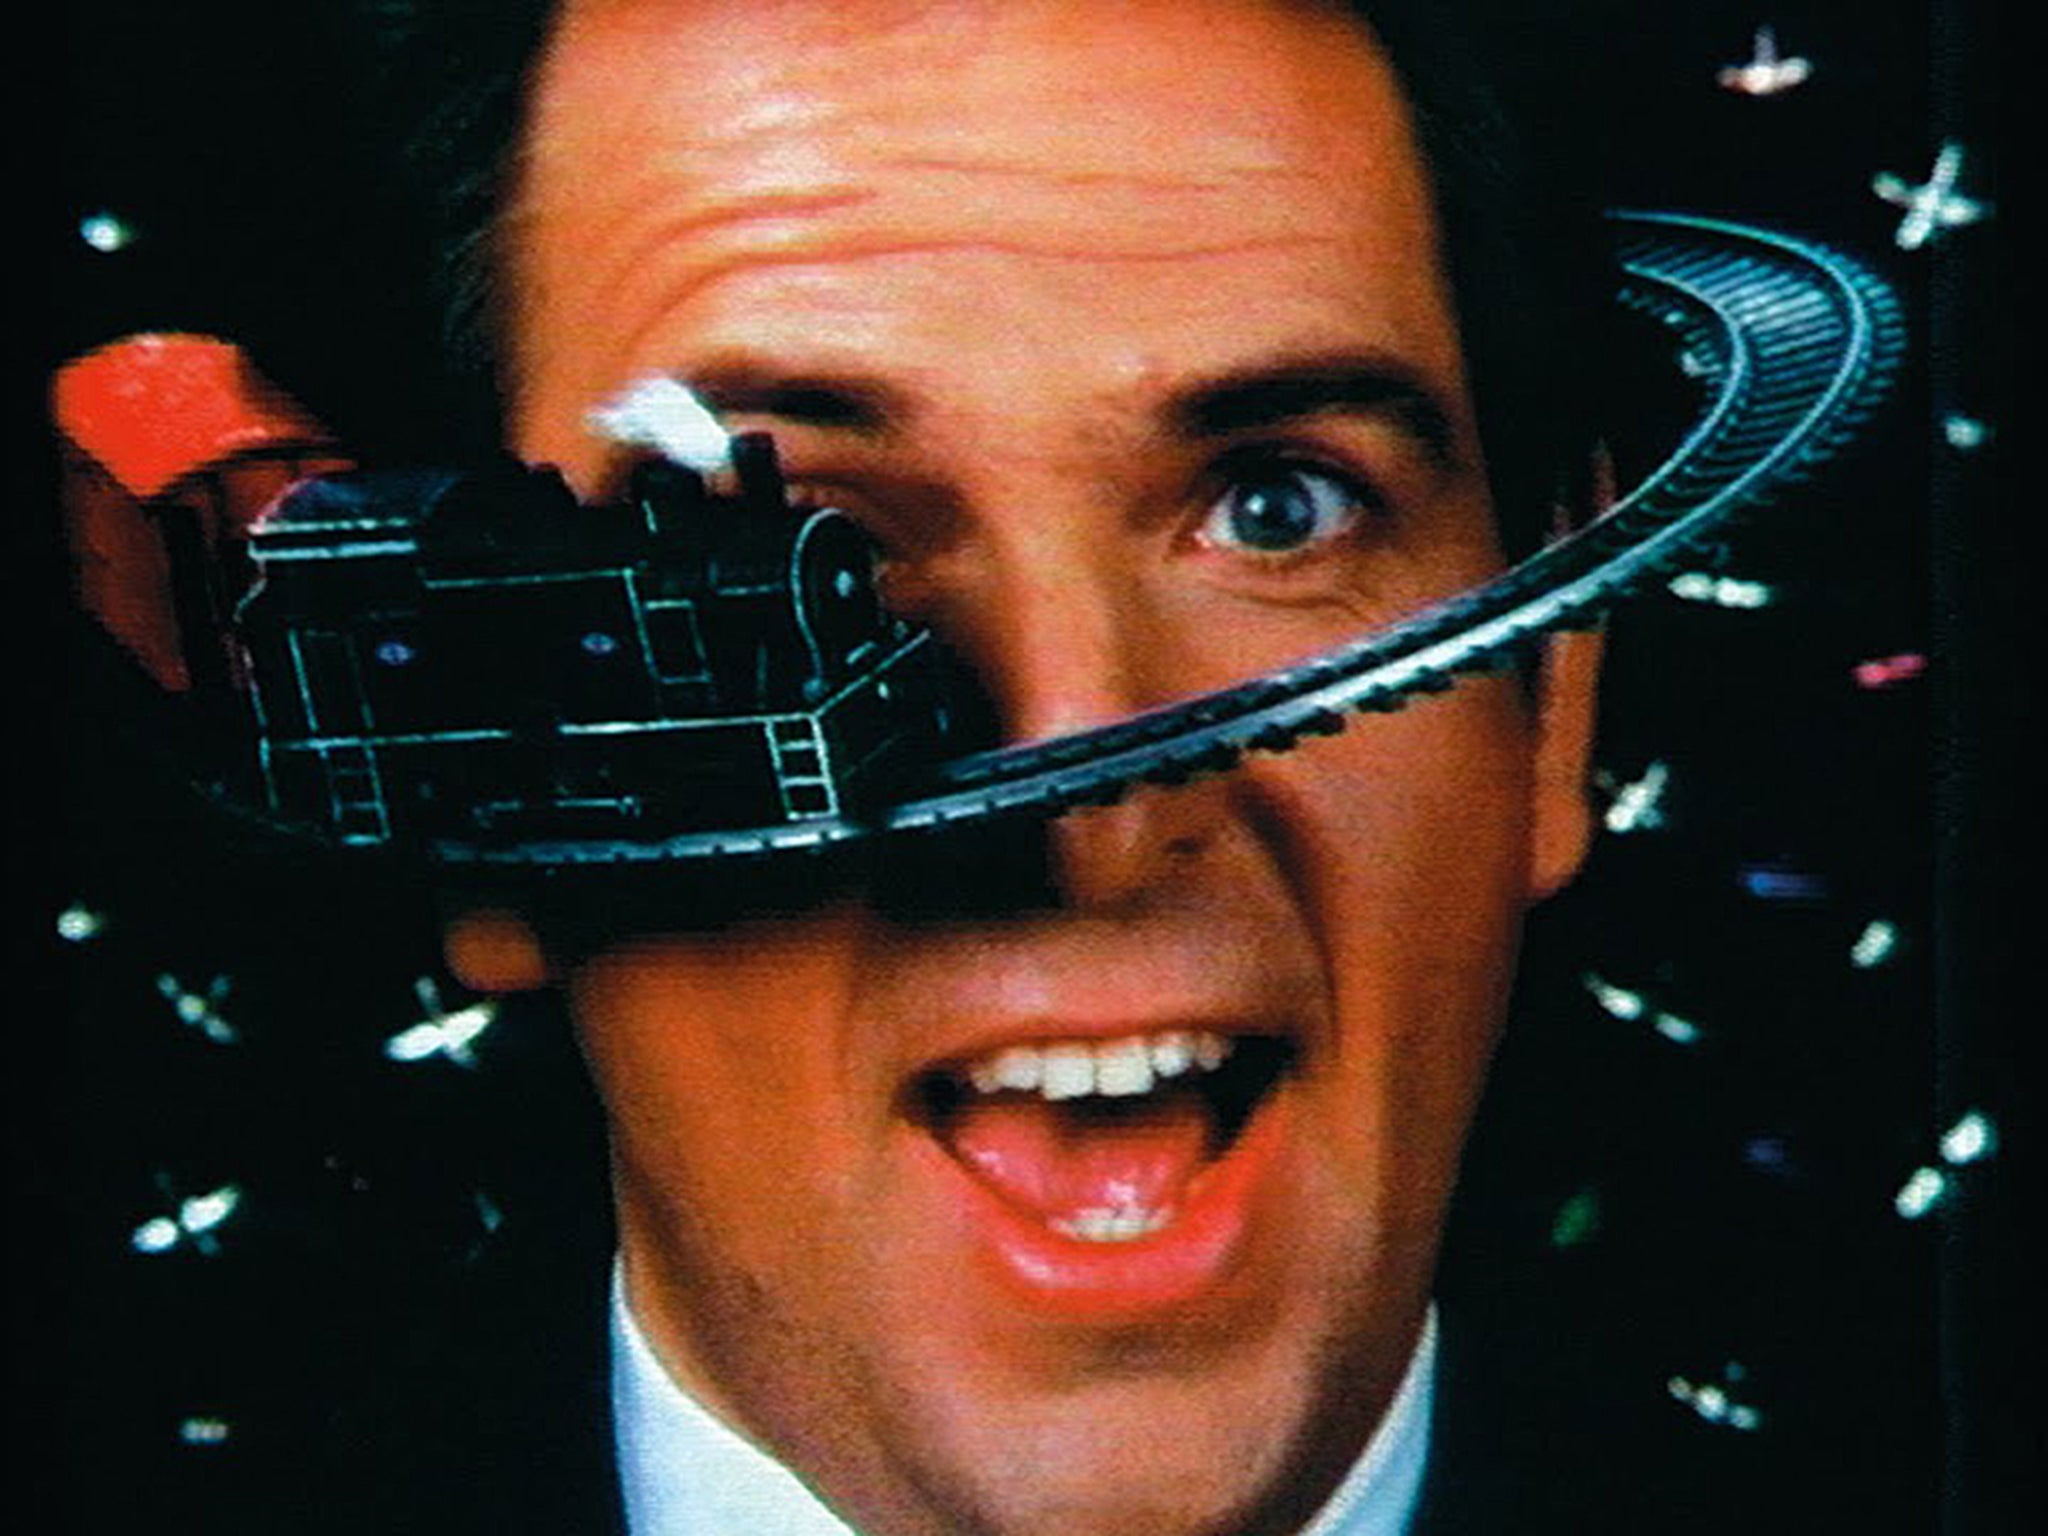 Peter Gabriel’s ‘Sledgehammer’ video smashed its way on to television screens in 1986, which was not a good year for music